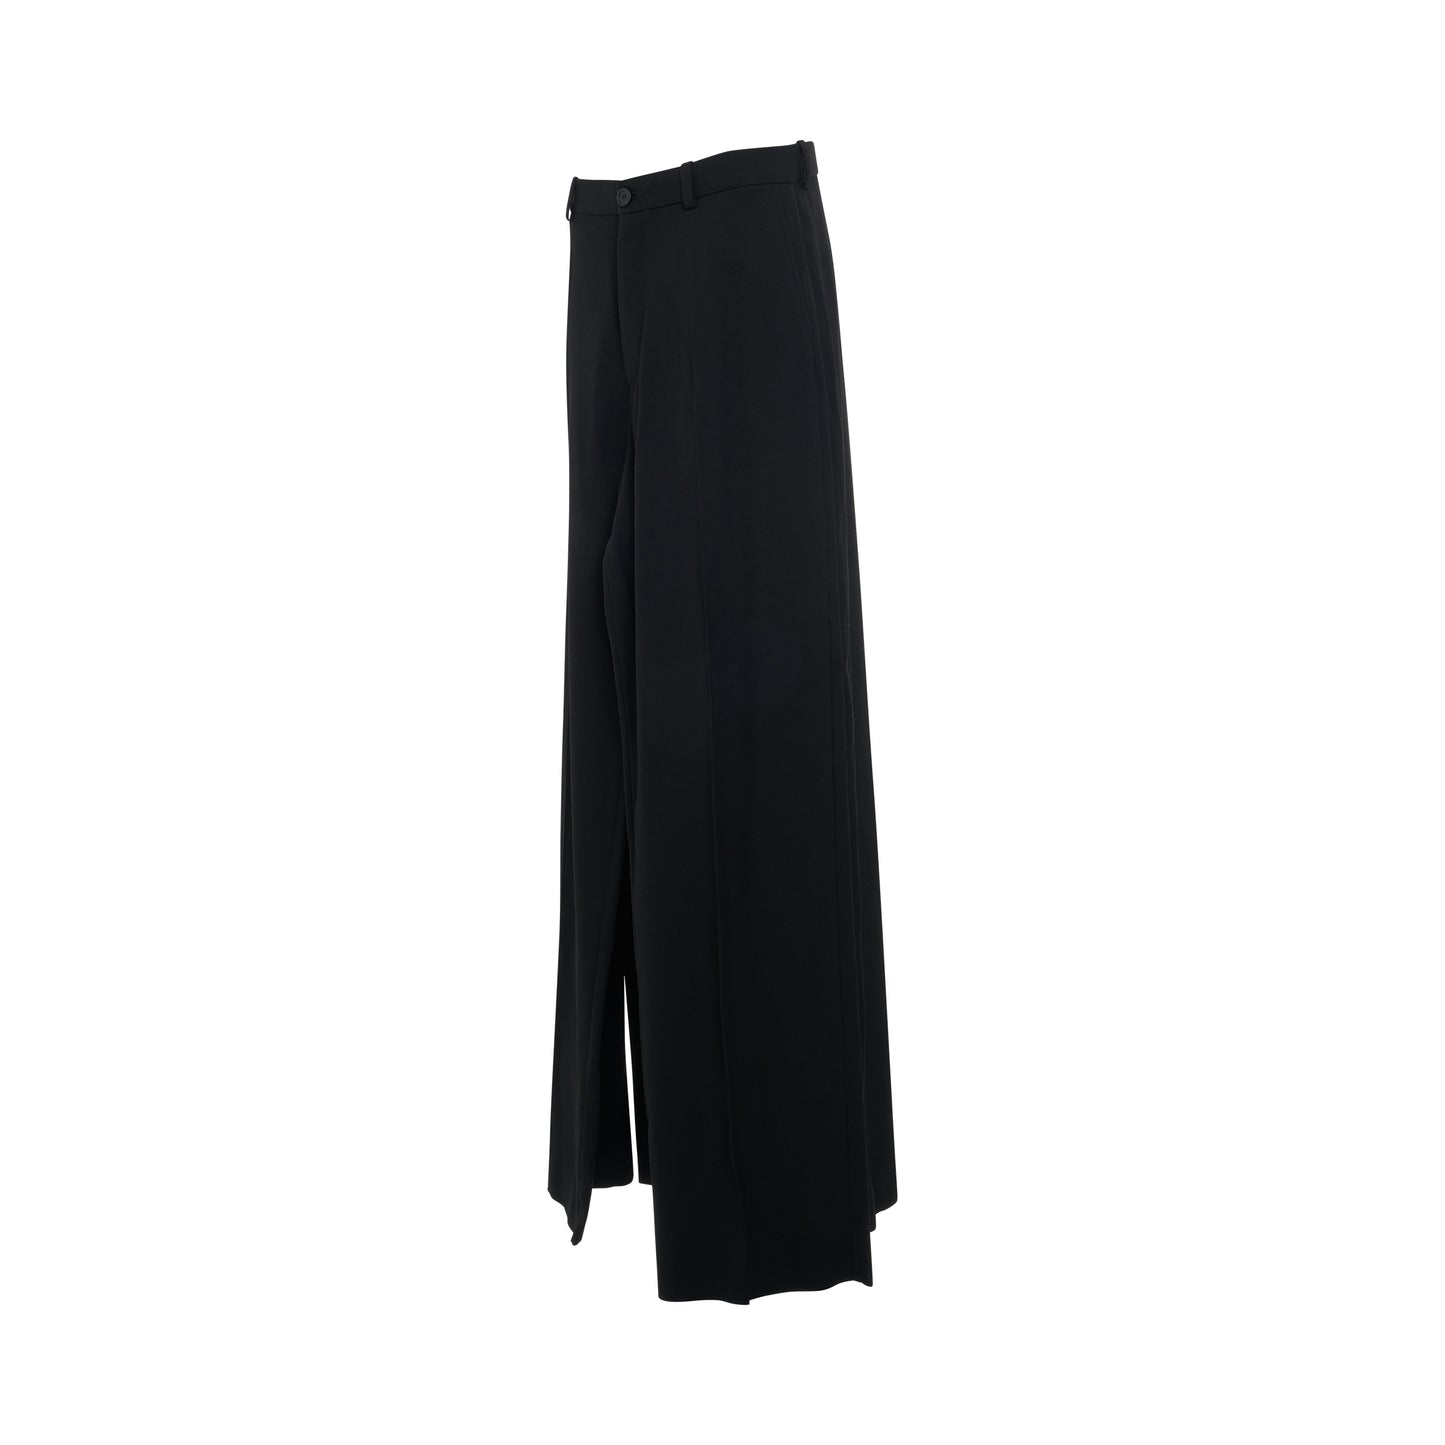 Deconstructed Double Front Pants in Black